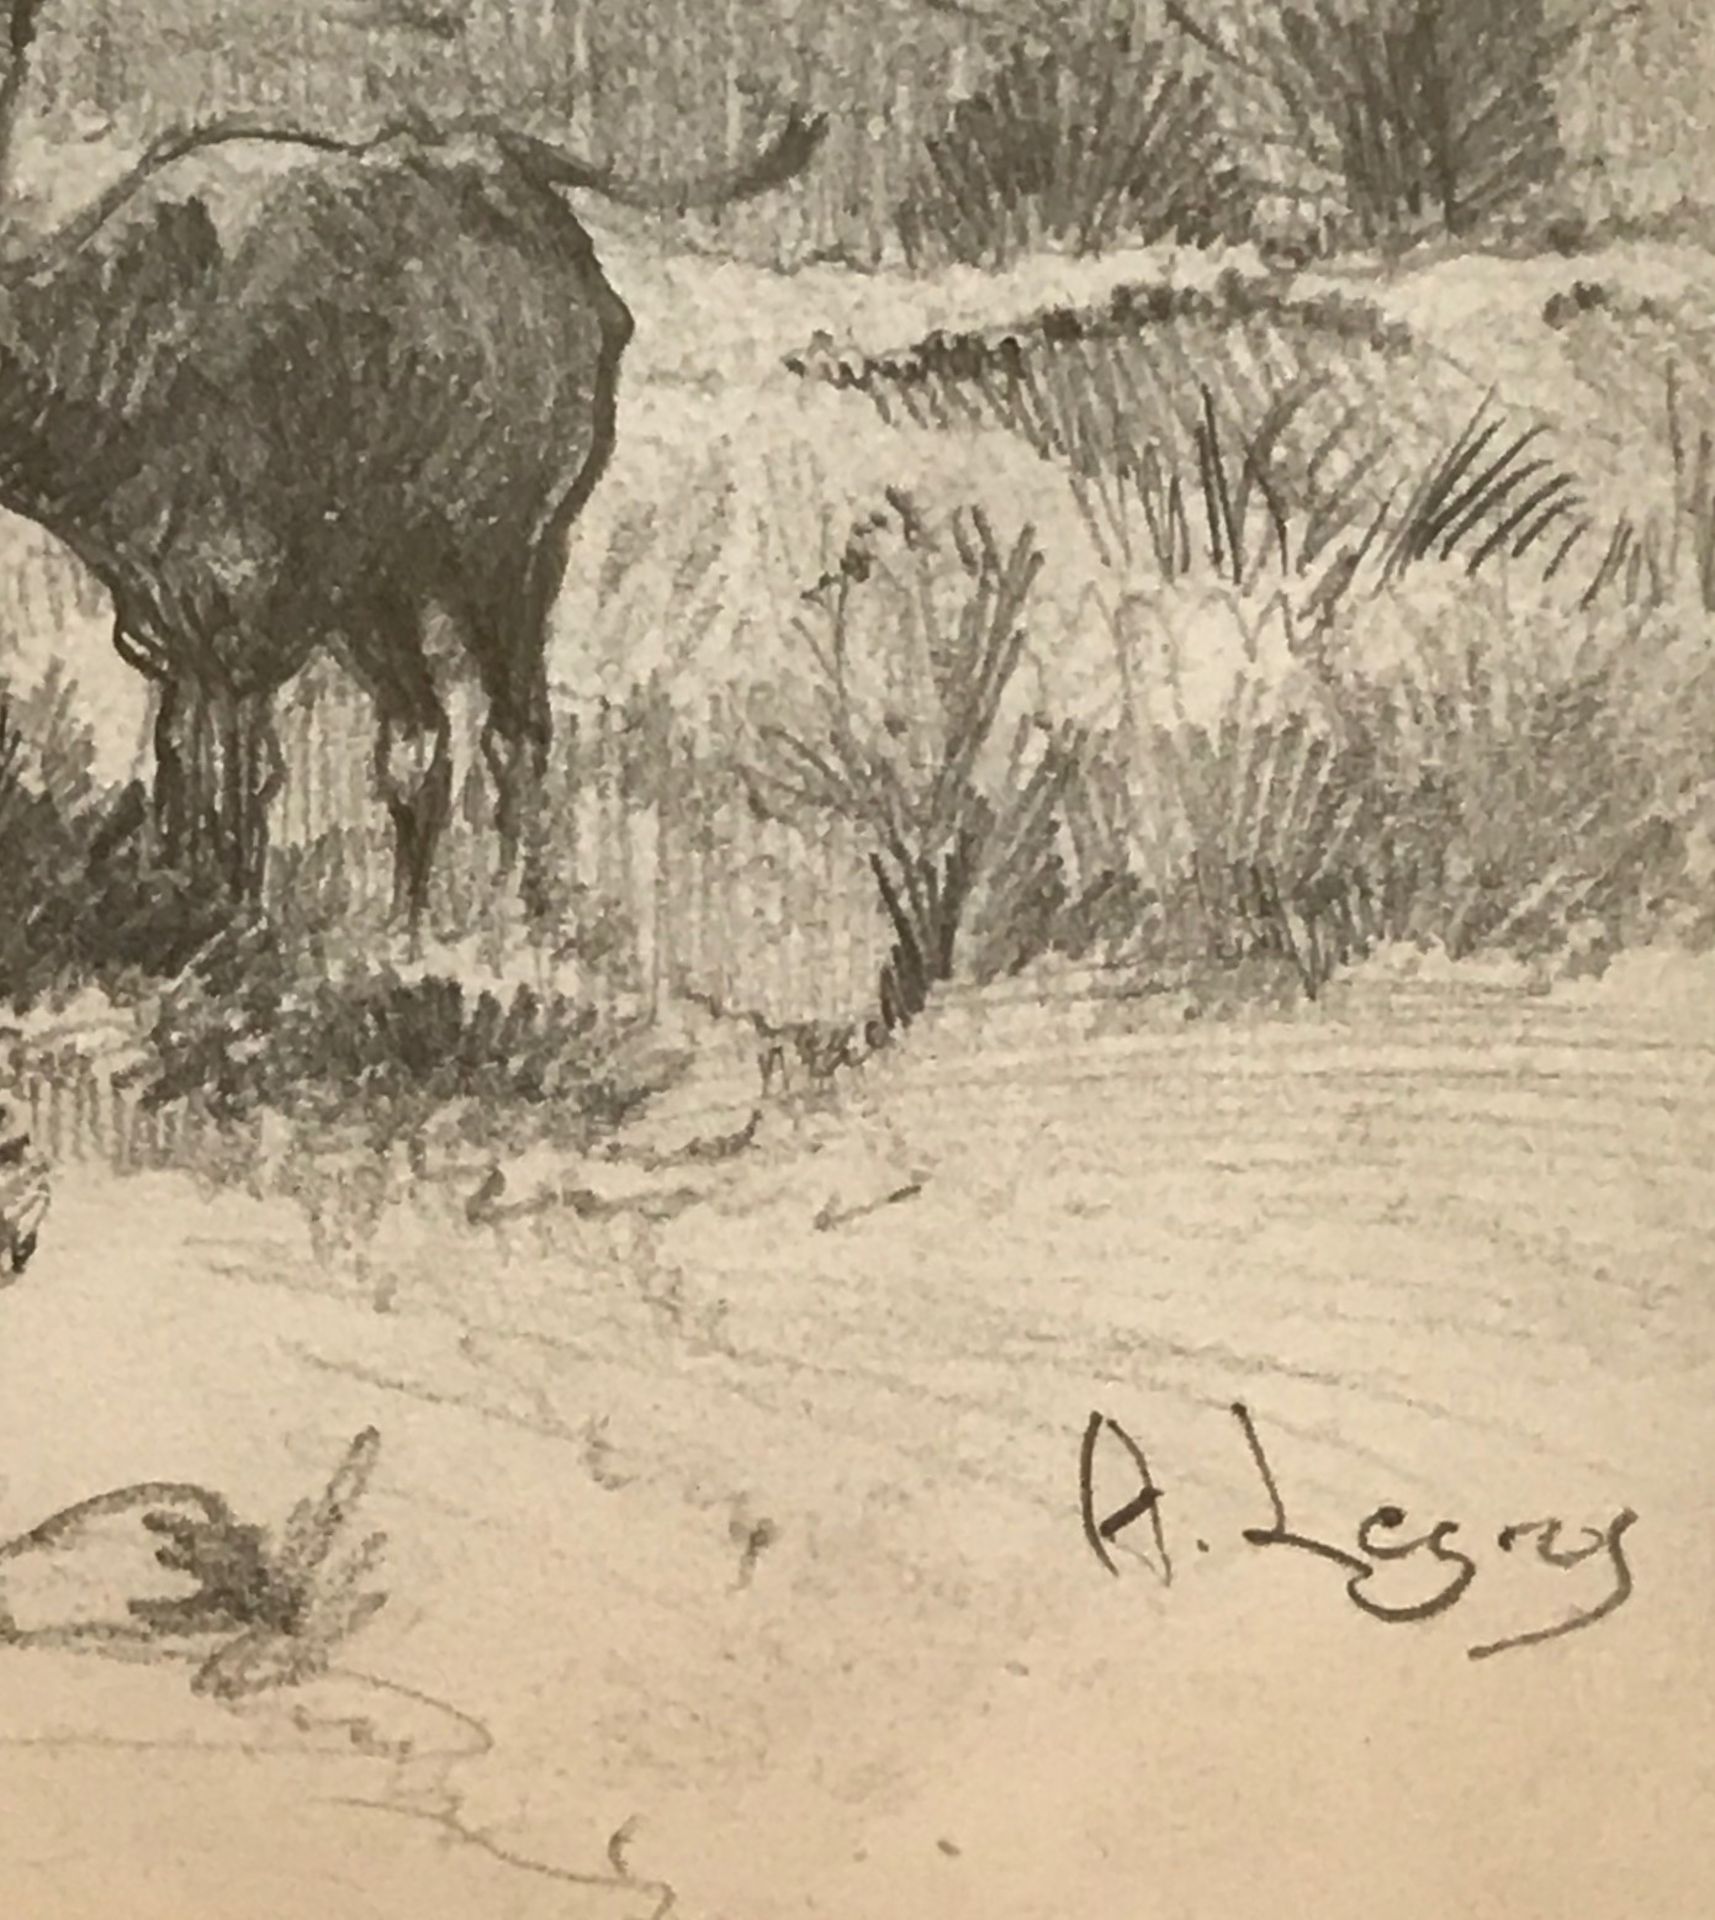 Cow at a water Meadow, Original pencil drawing by Alphonse Legros 1837-1911, Exhibited R.A, R.S.A - Image 3 of 4